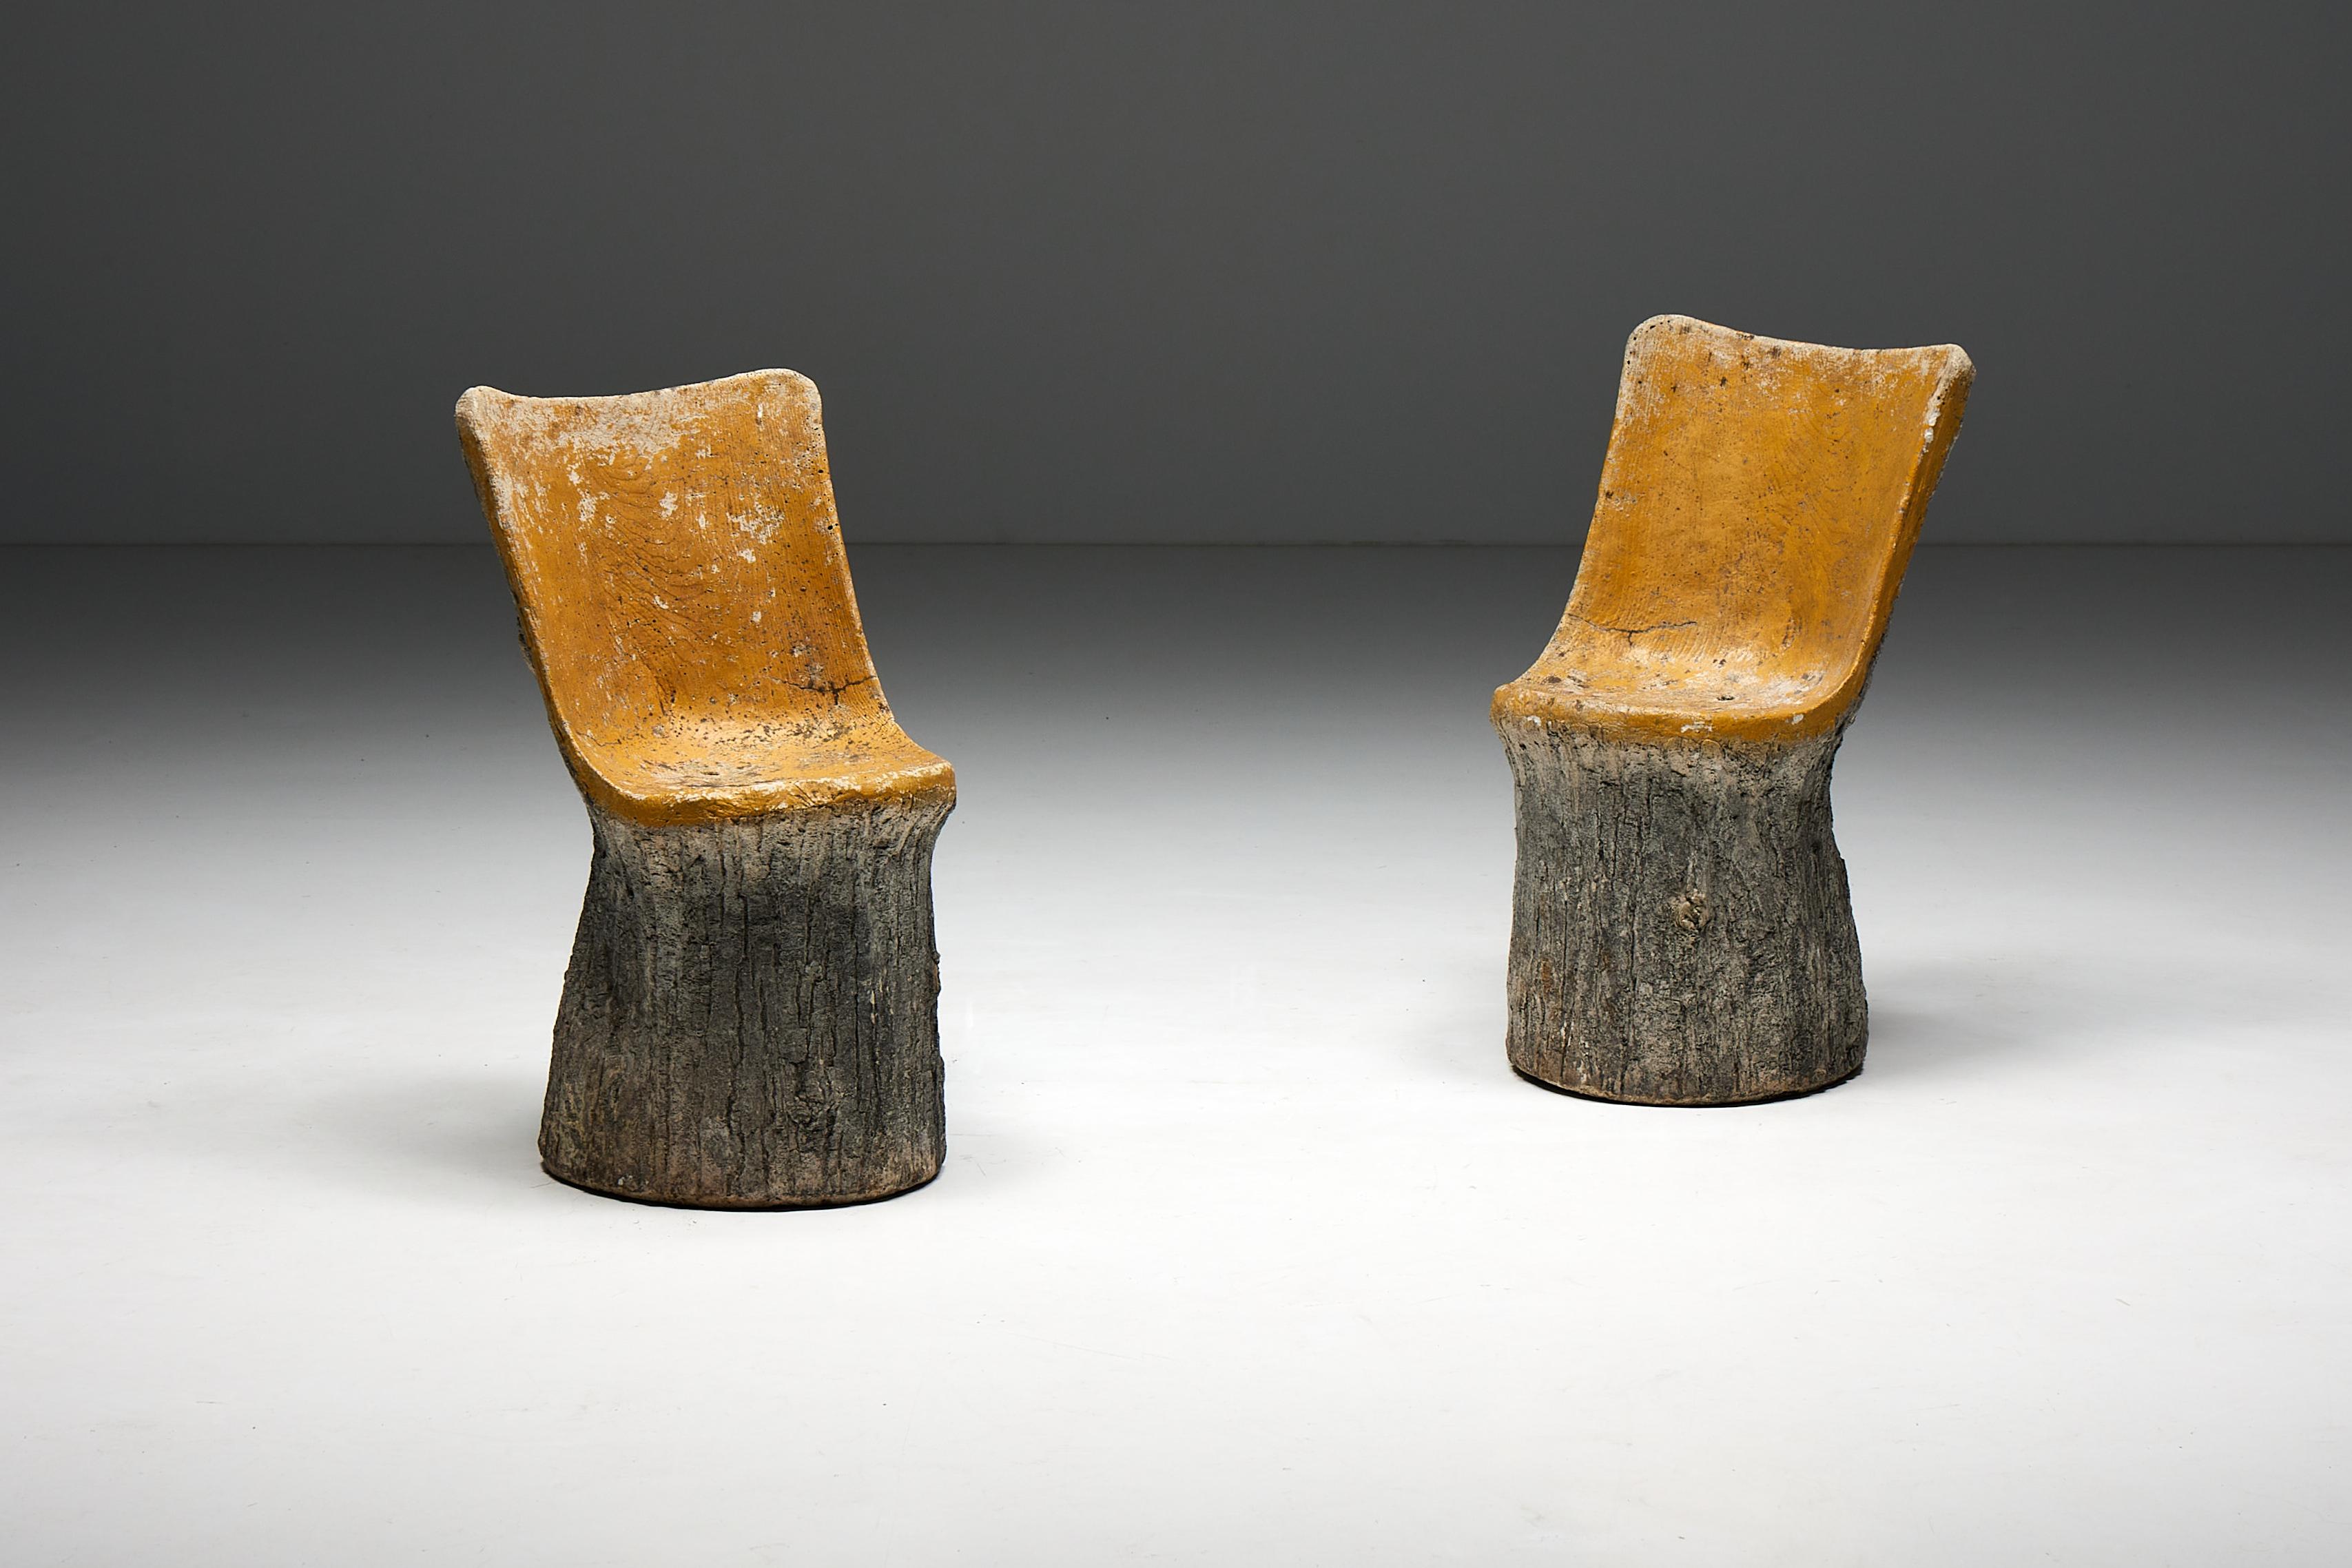 French Brutalist Concrete Chairs, France, 1970s For Sale